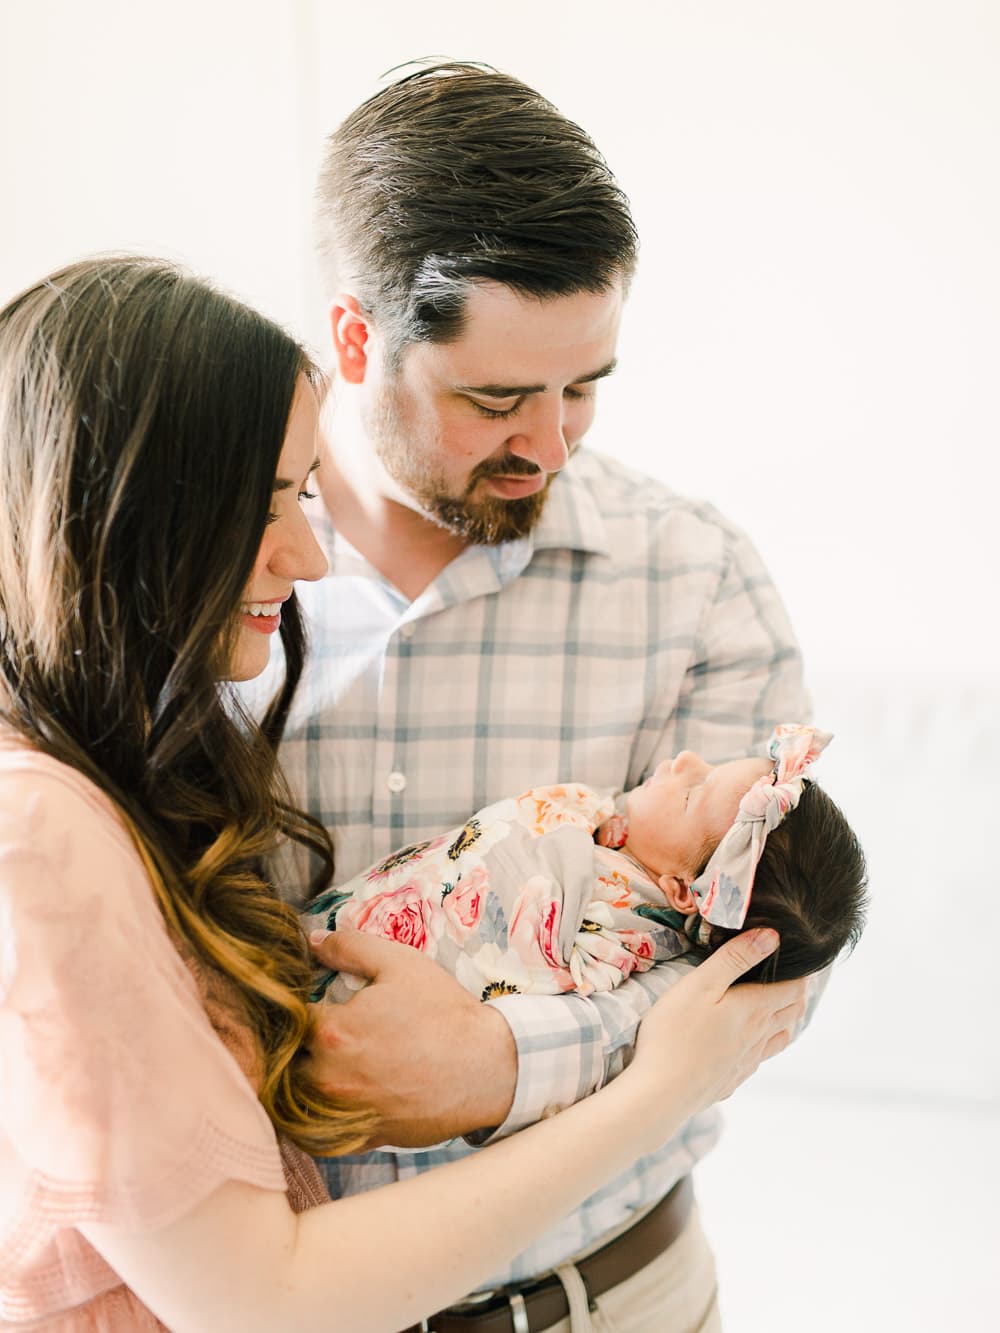 Newborn with parents photo inspiration, Cleveland Newborn Photography, In-home newborn session by Juliana Kaderbek Photography